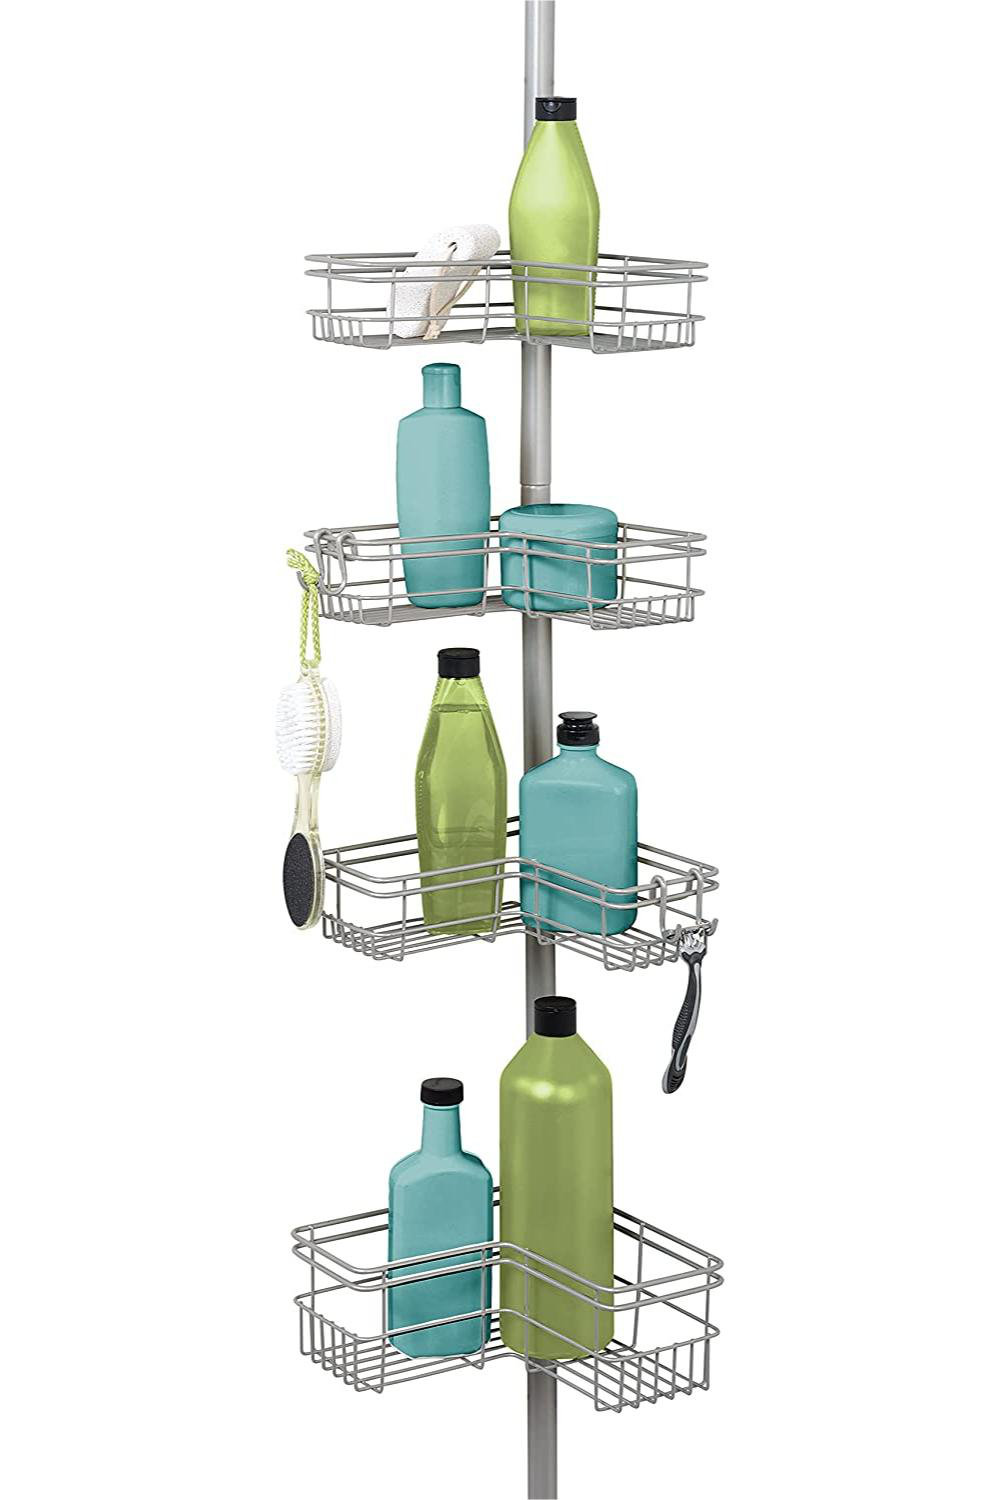 White Tension Pole Shower Caddy with 4 Shelves, 60 to 97